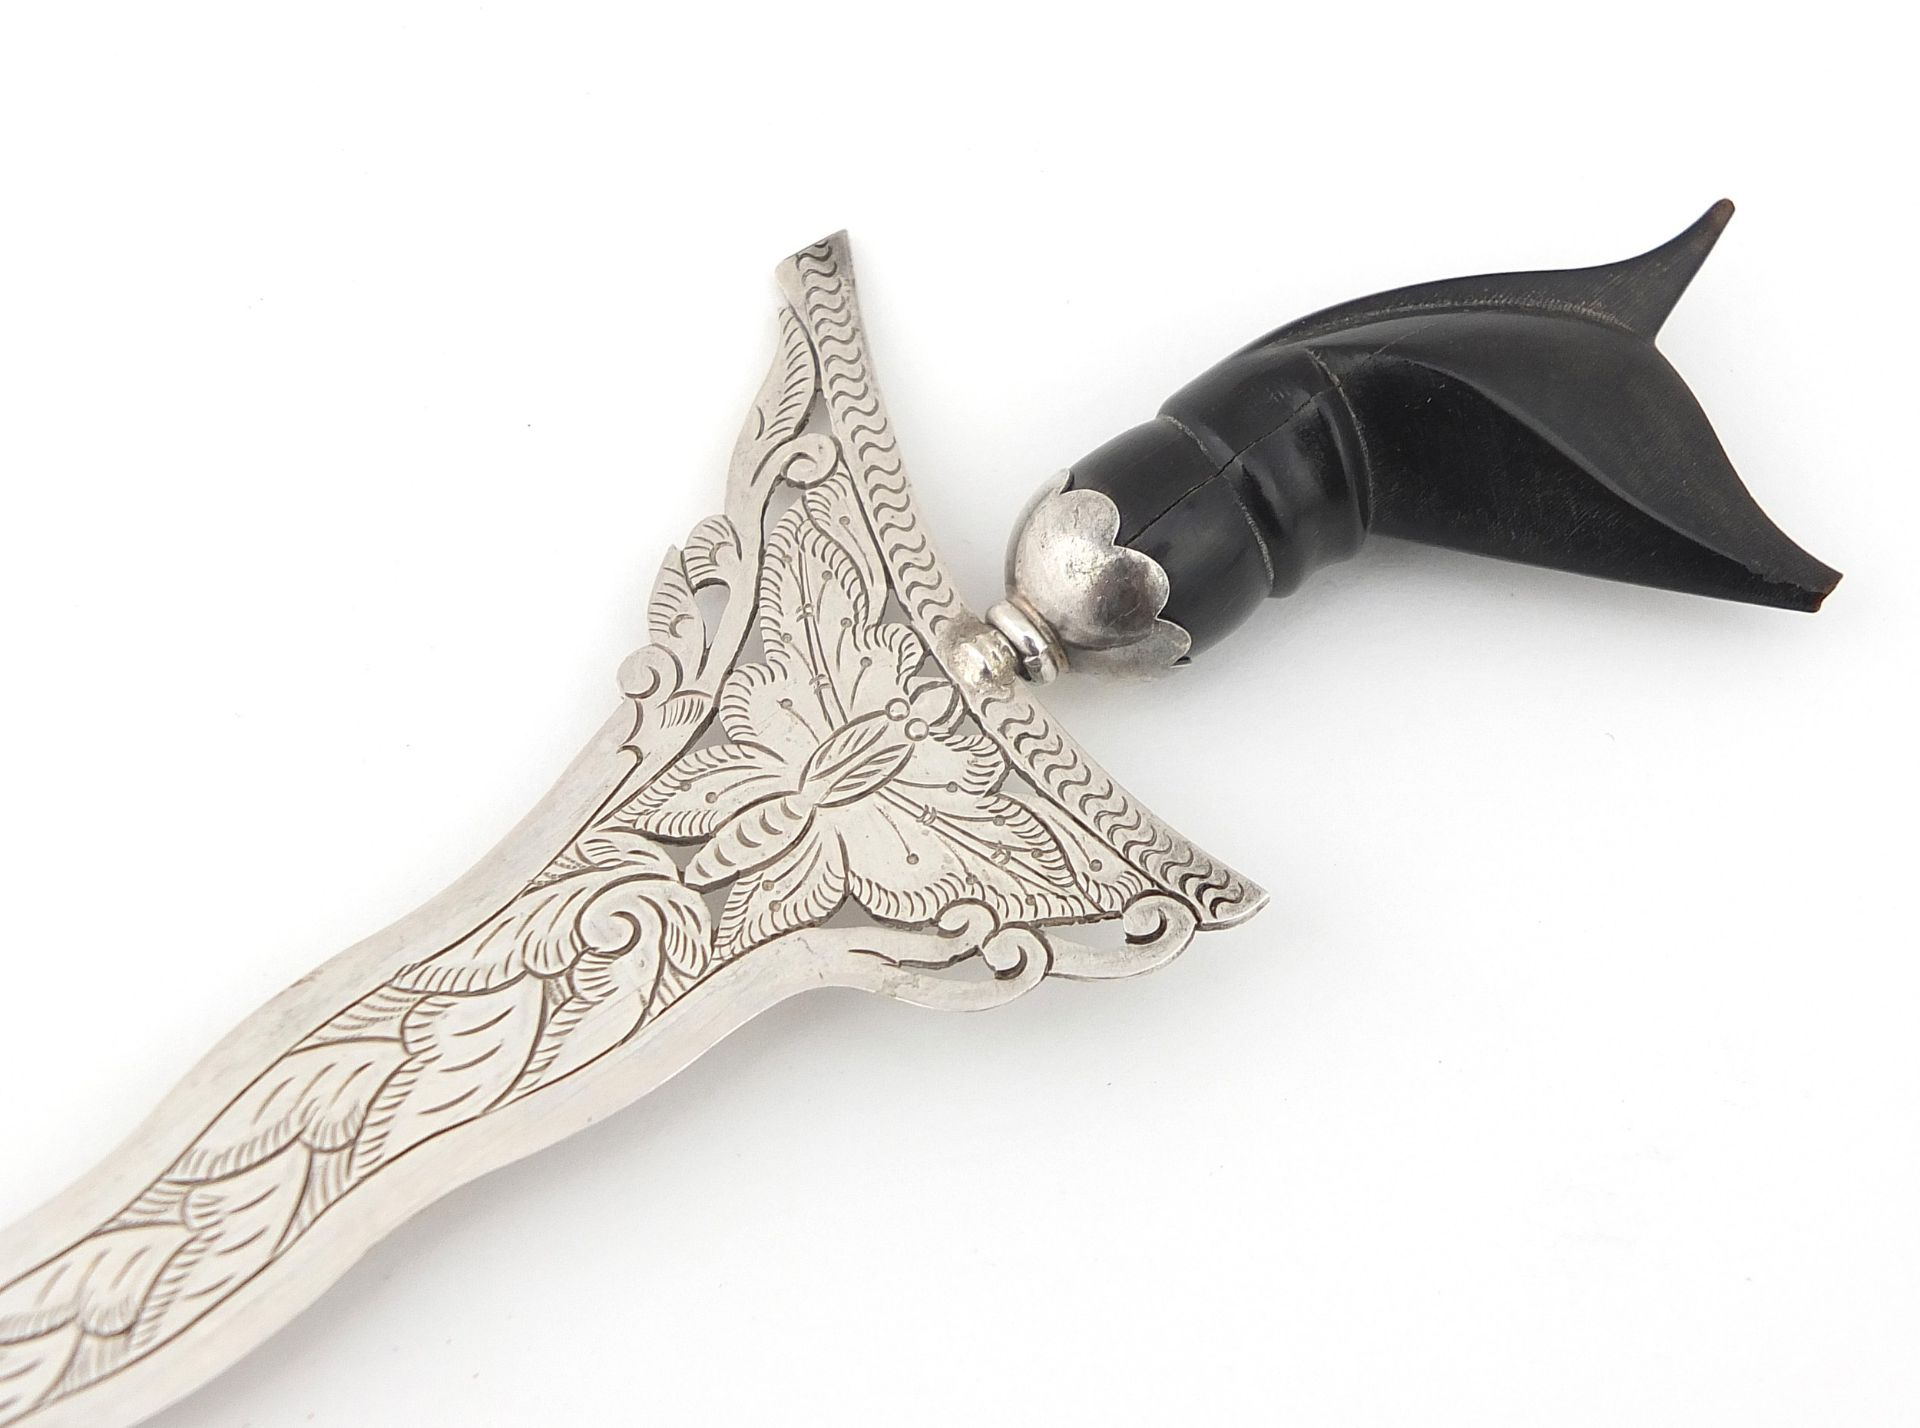 Miniature Malaysian silver Kris with ebonised handle, engraved Malaysia 1260B, 20cm in length, 27.7g - Image 2 of 5